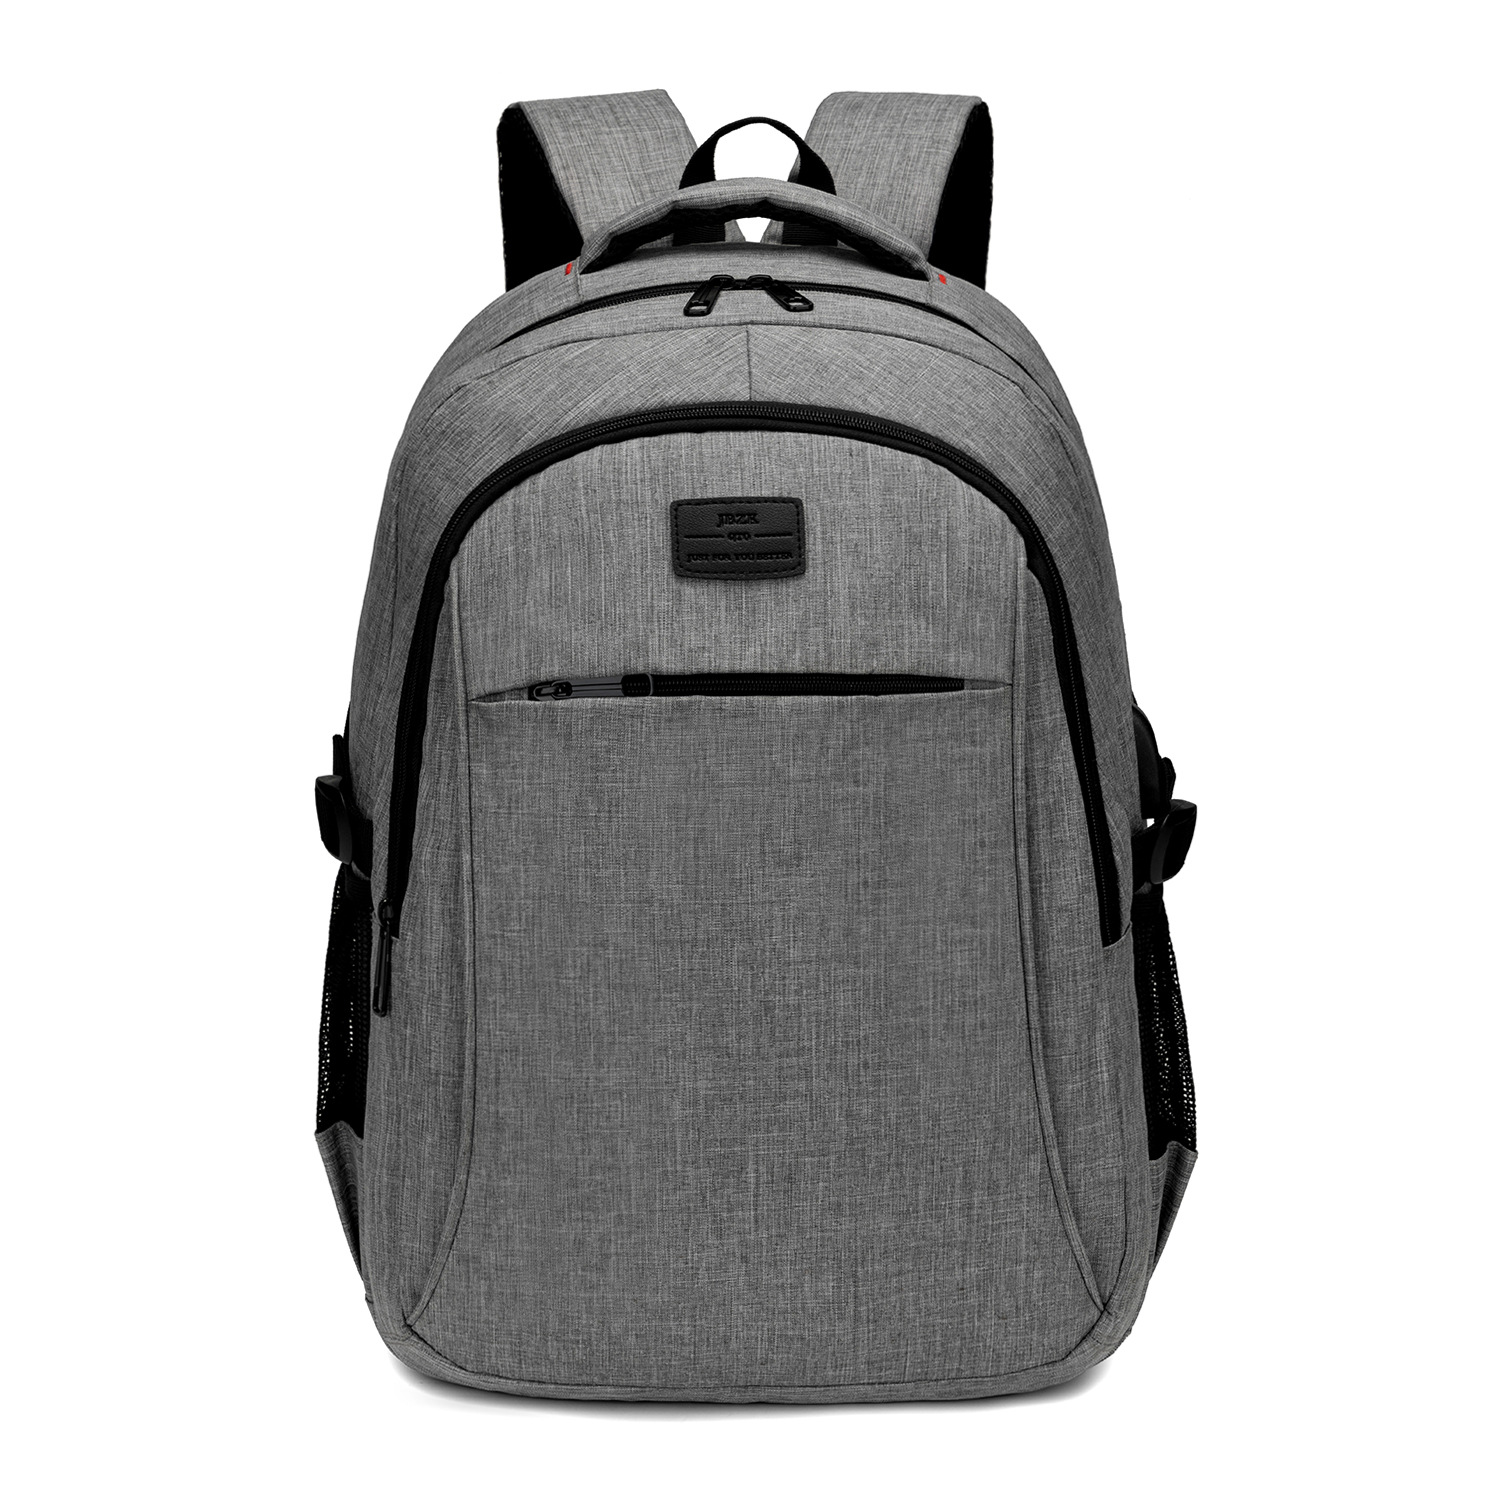 Best Laptop Backpacks Manufacturers in Bangalore